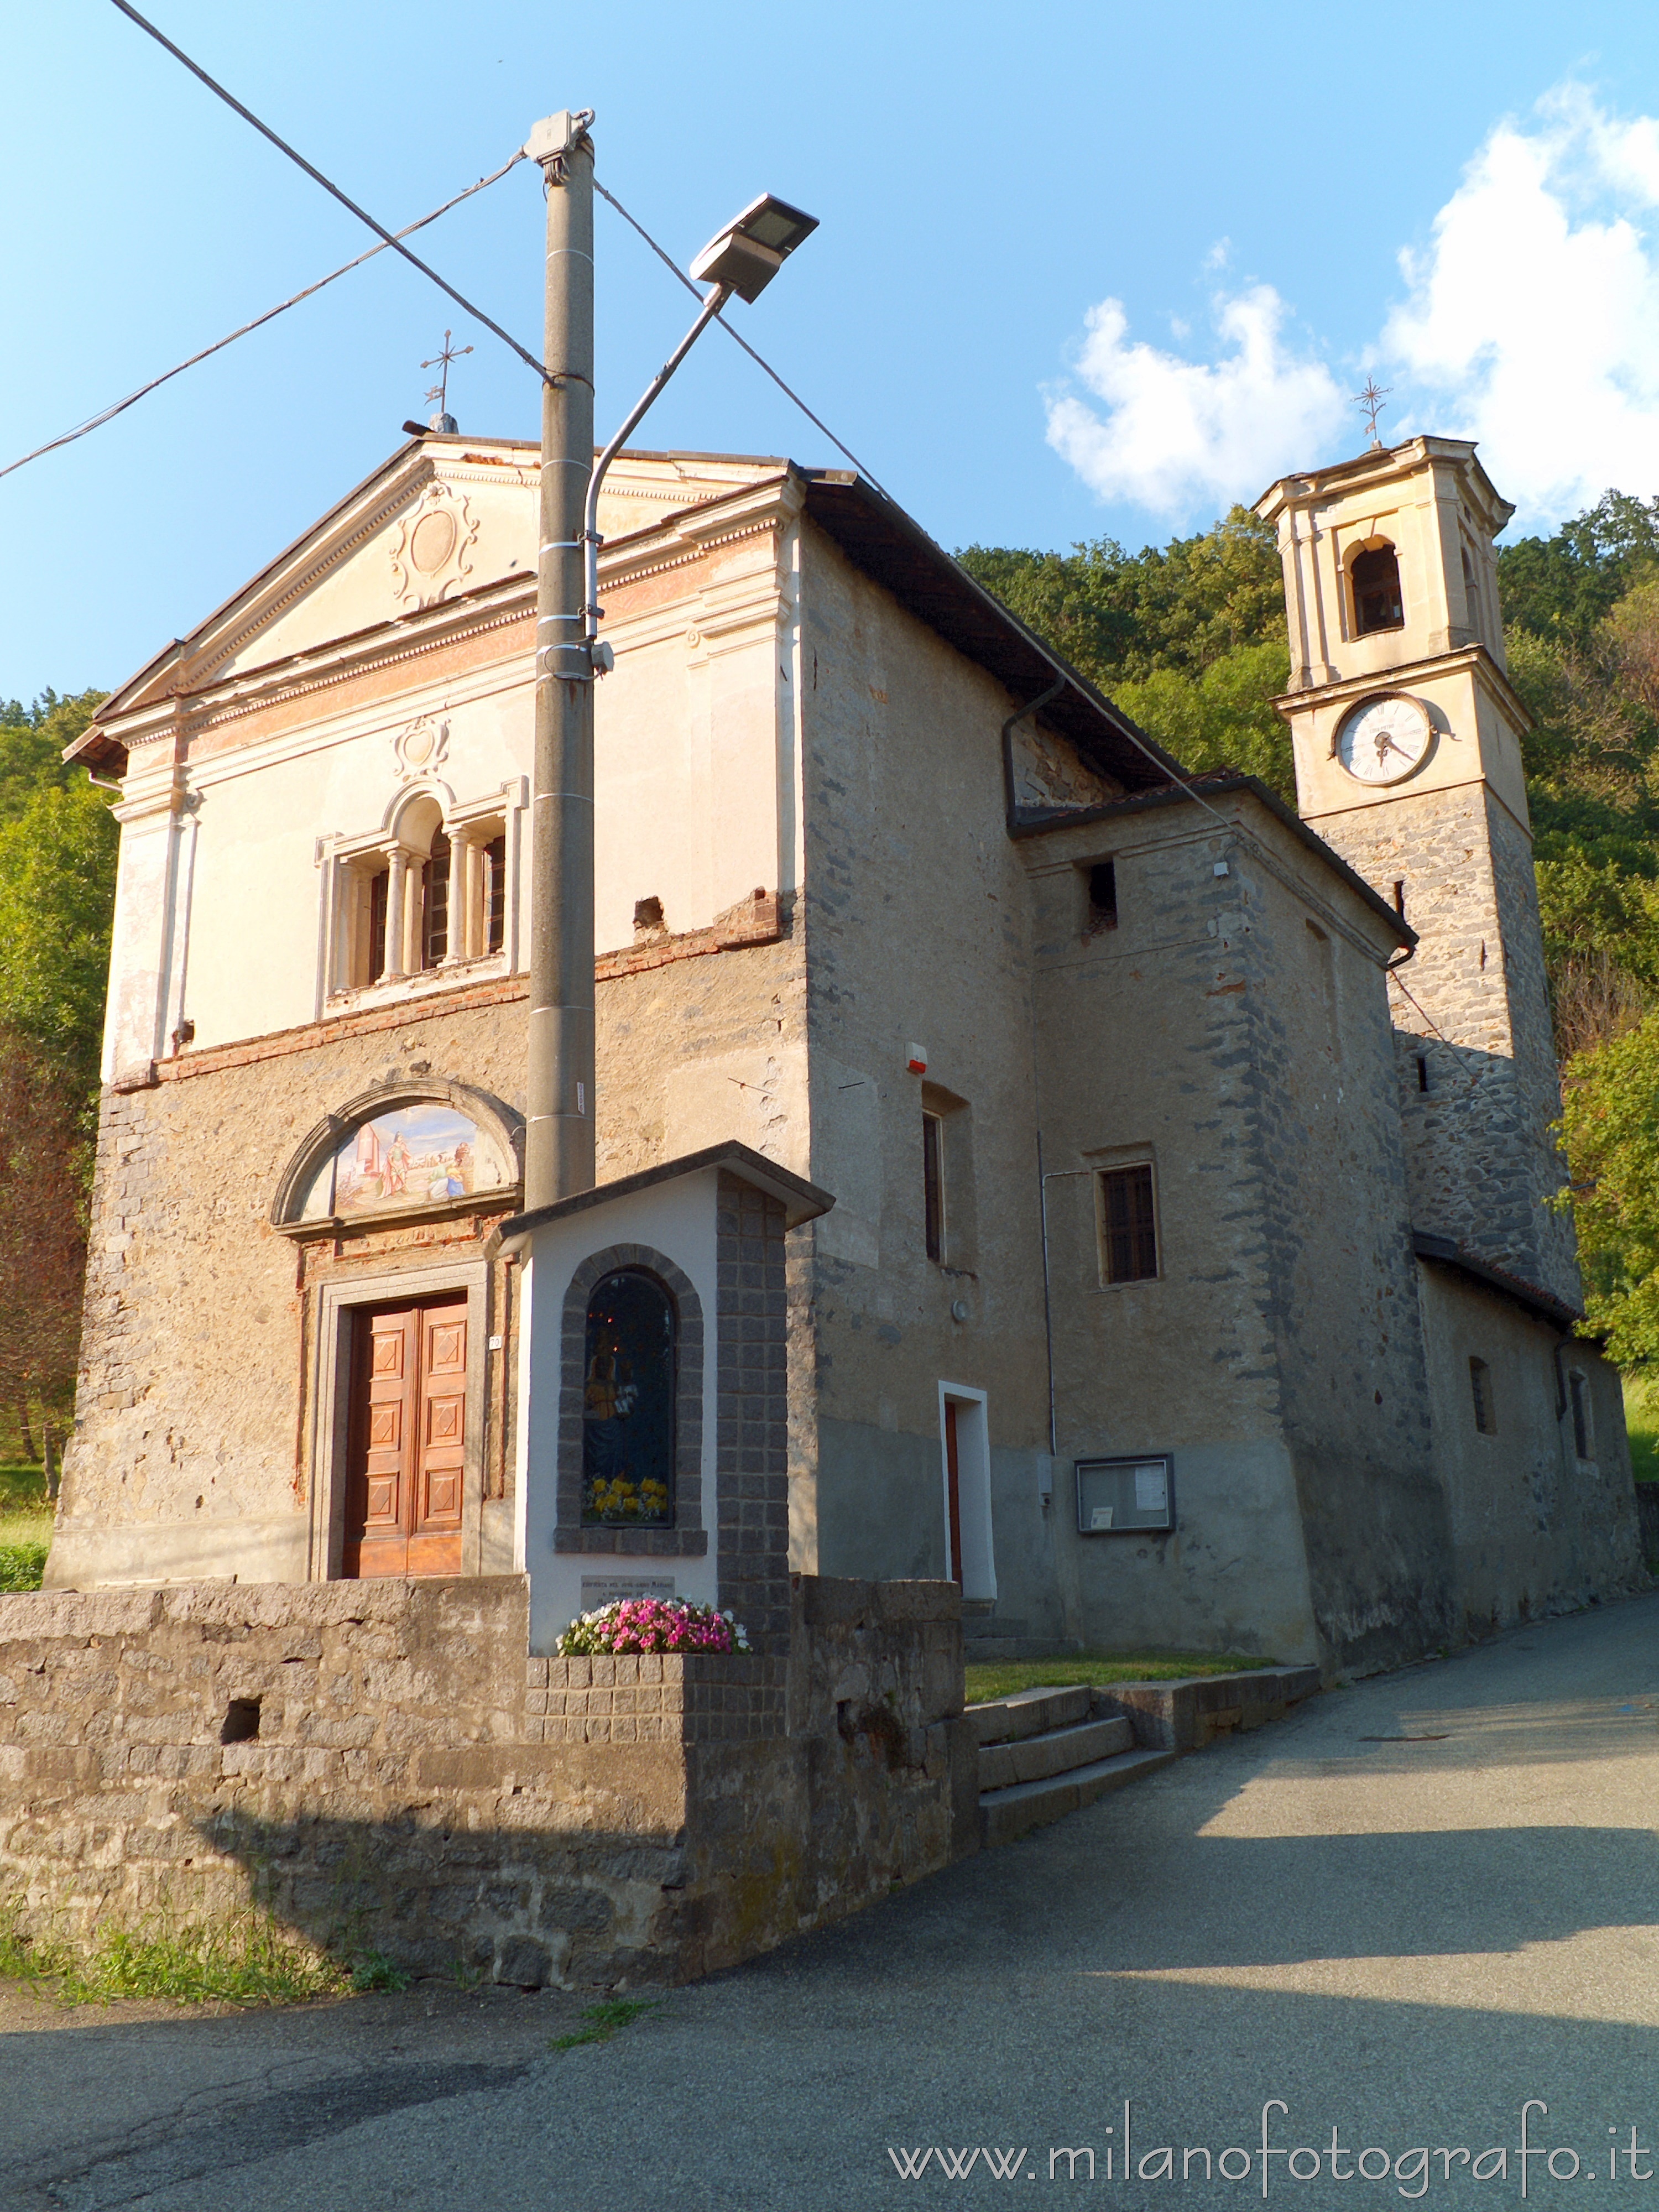 Passobreve fraction of Sagliano Micca (Biella, Italy): Oratory of the Saints Defendente and Lorenzo - Passobreve fraction of Sagliano Micca (Biella, Italy)